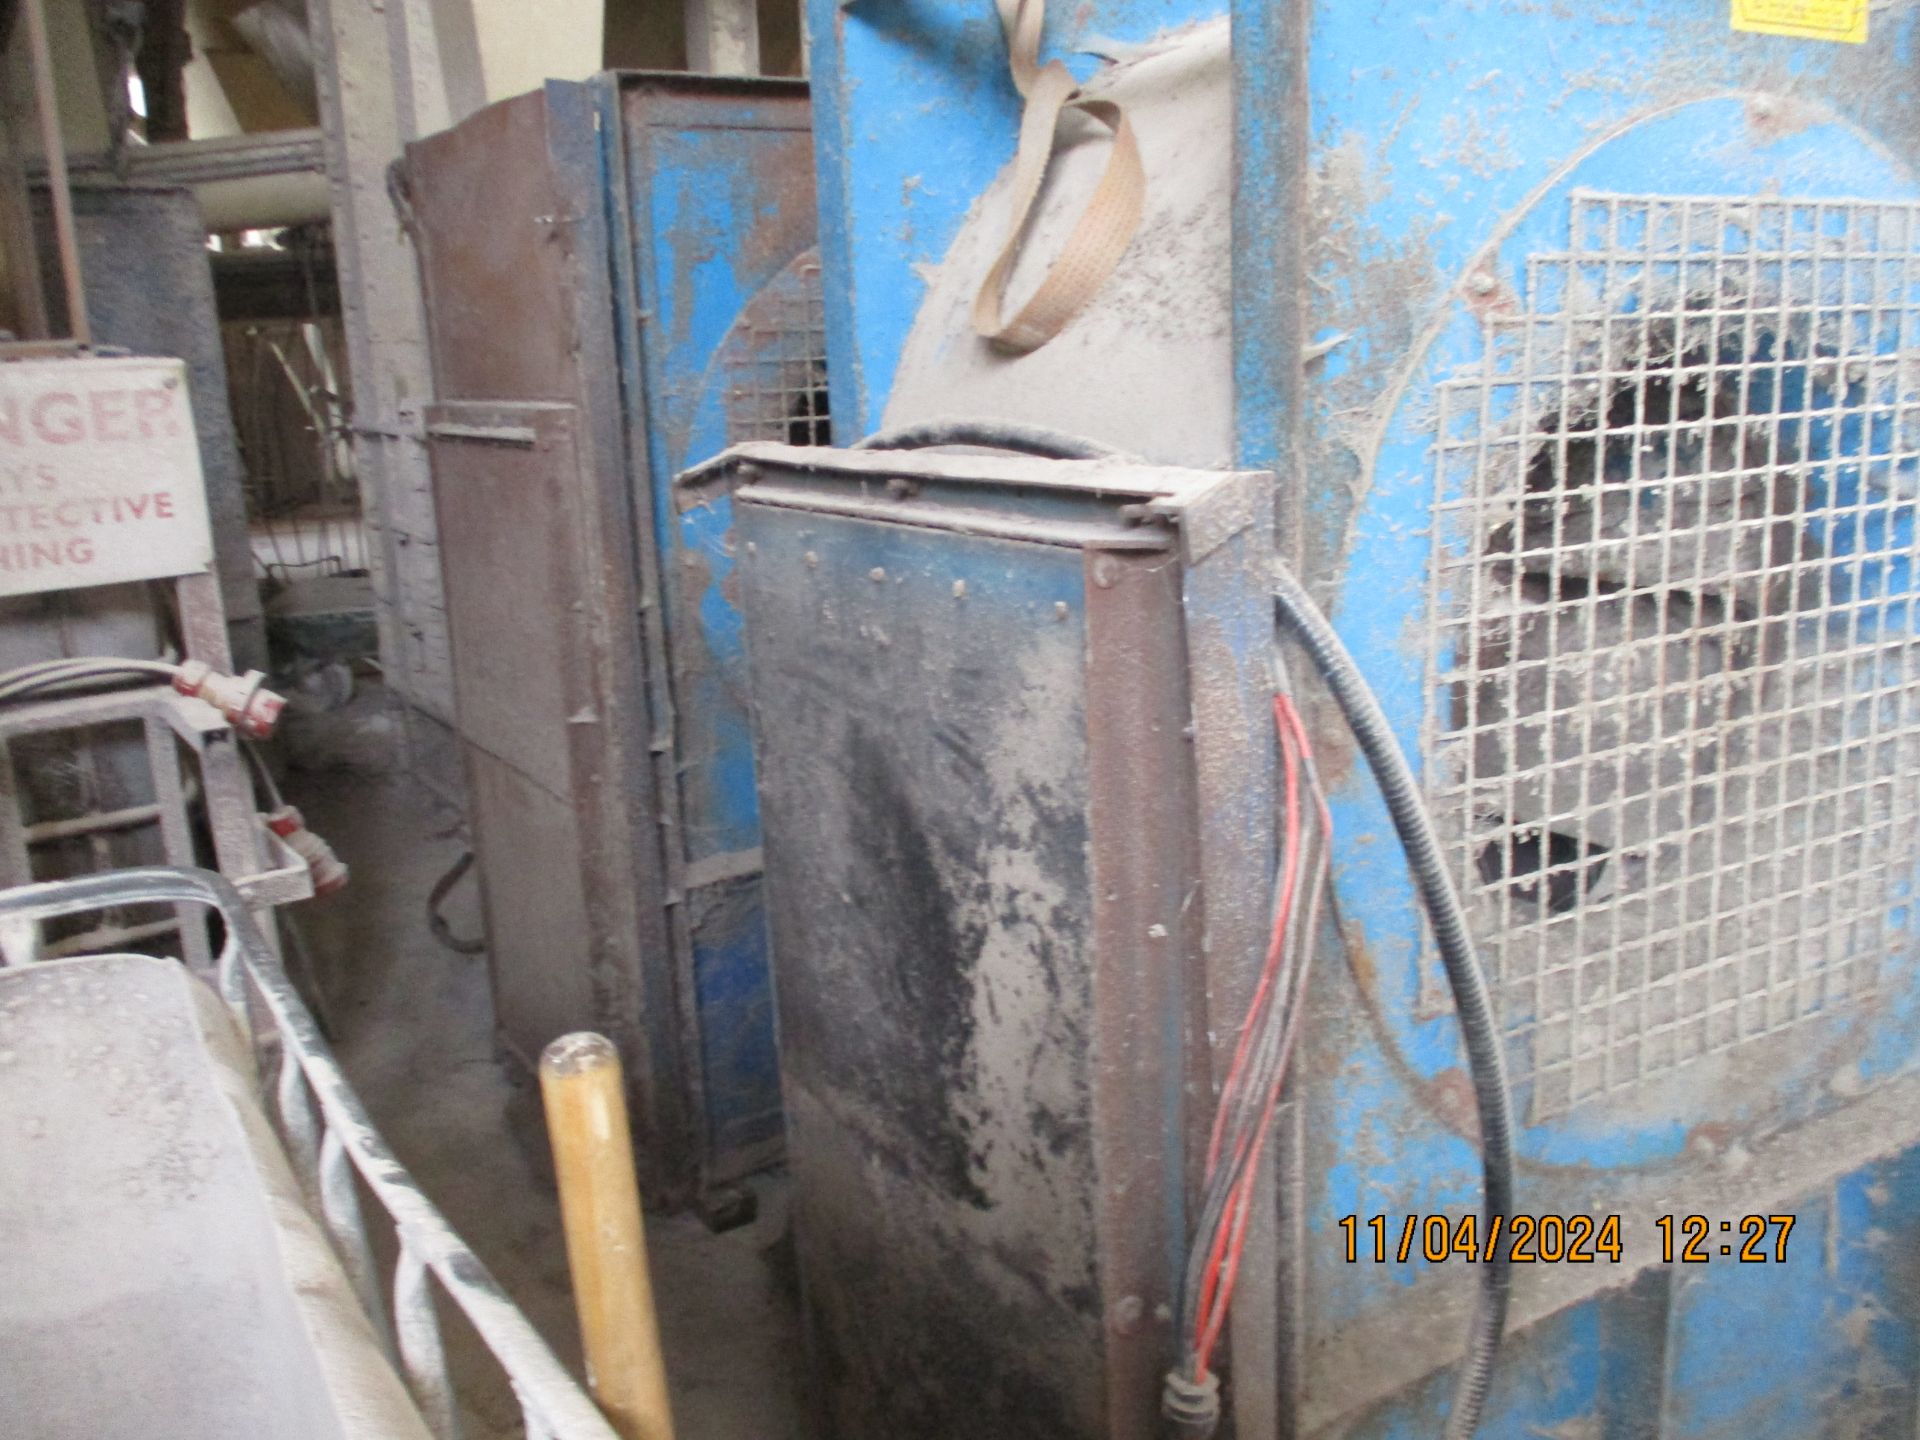 Grain Drying Fan, with 37kW electric motor, loading free of charge - yes, lot located in Rath, Birr, - Image 3 of 3